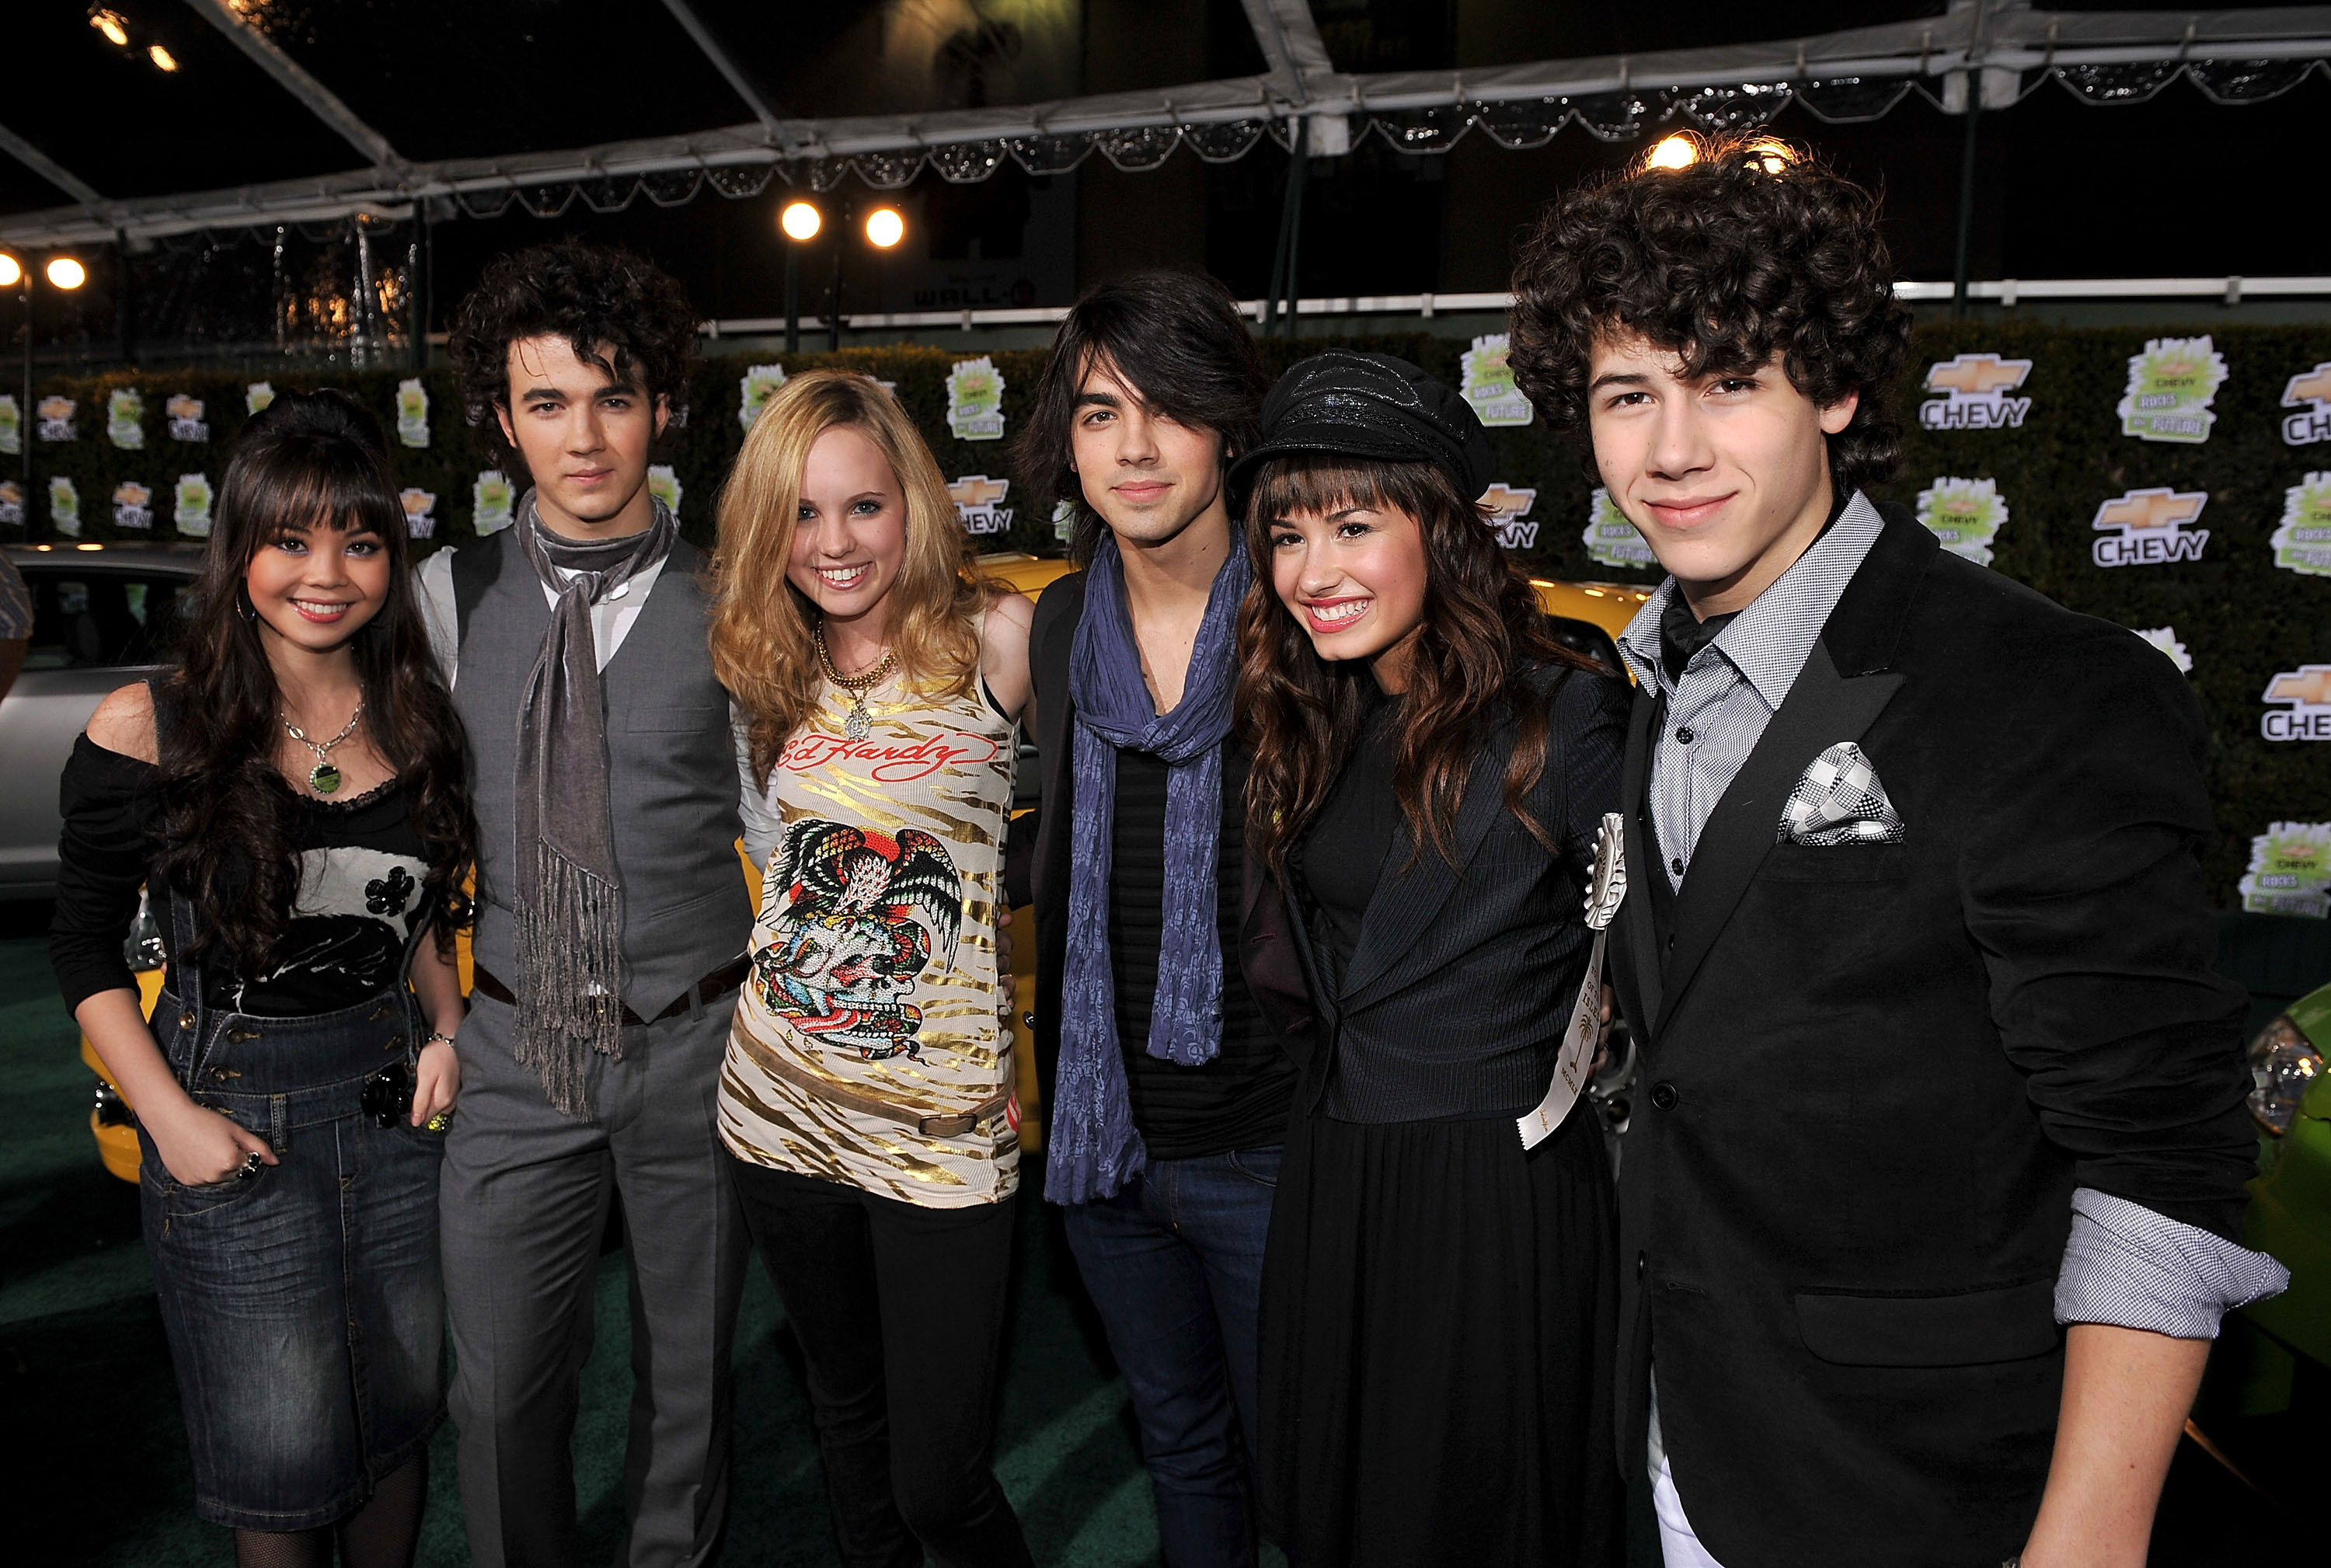 Demi poses with her Camp Rock cast at an event